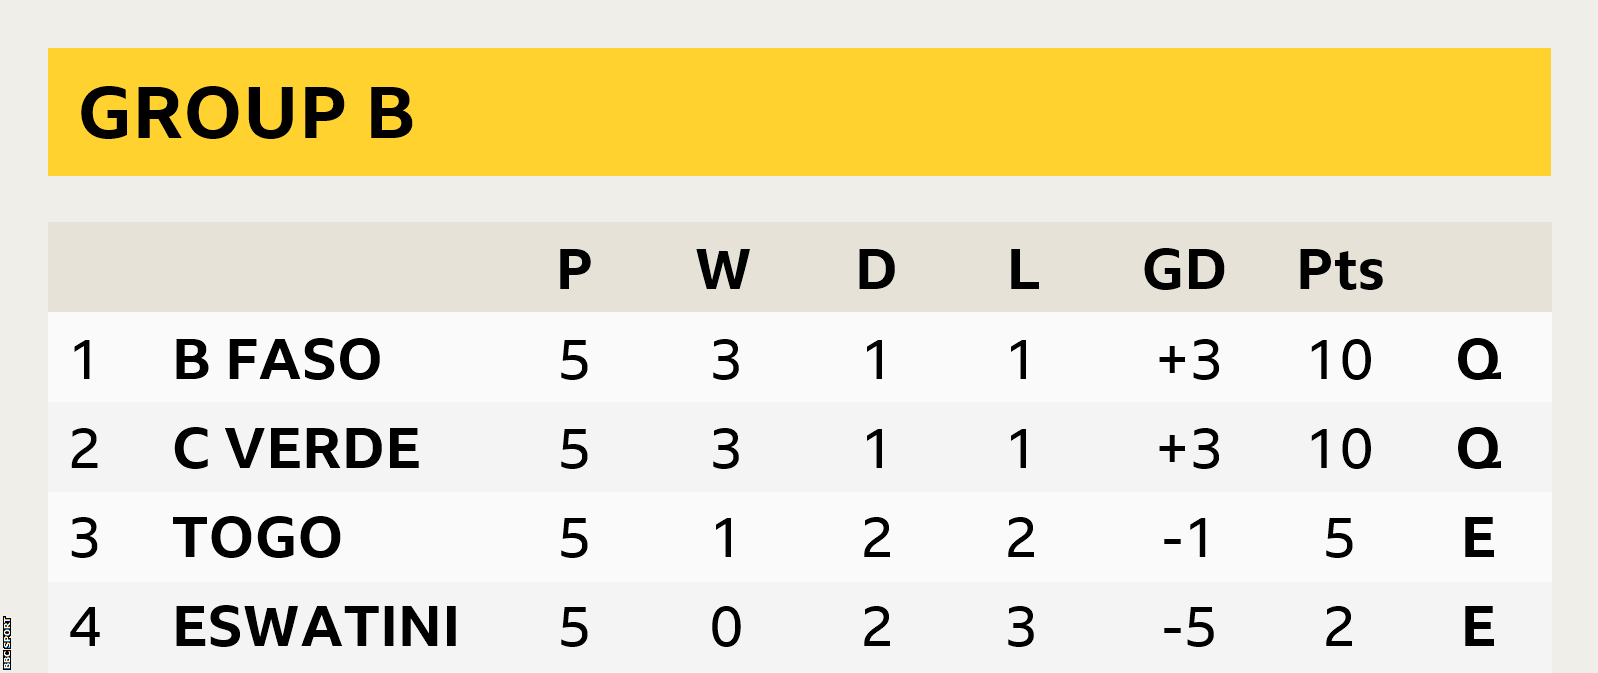 Afcon Group B table